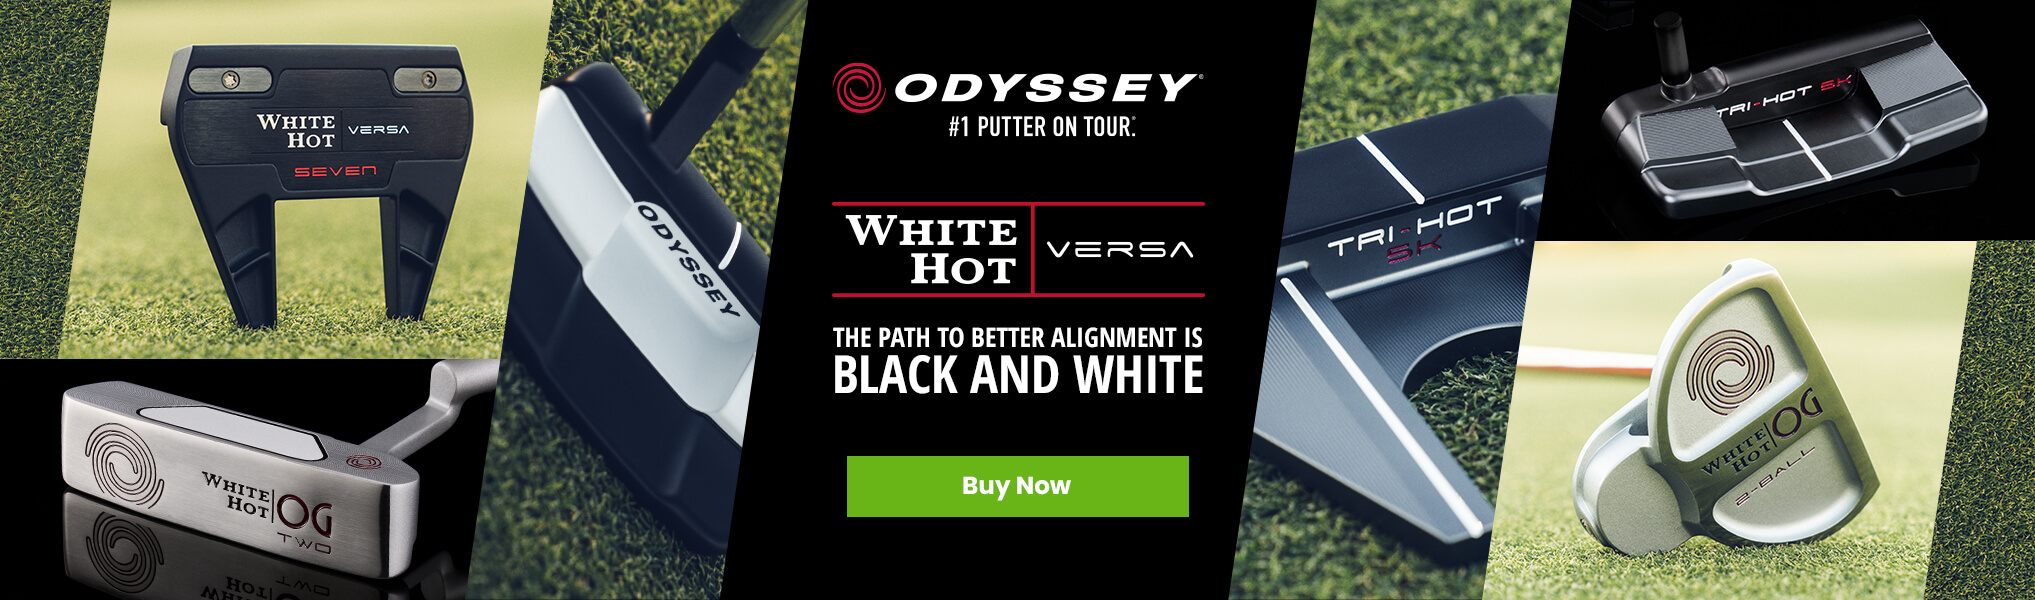 Odyssey Putters Available Now